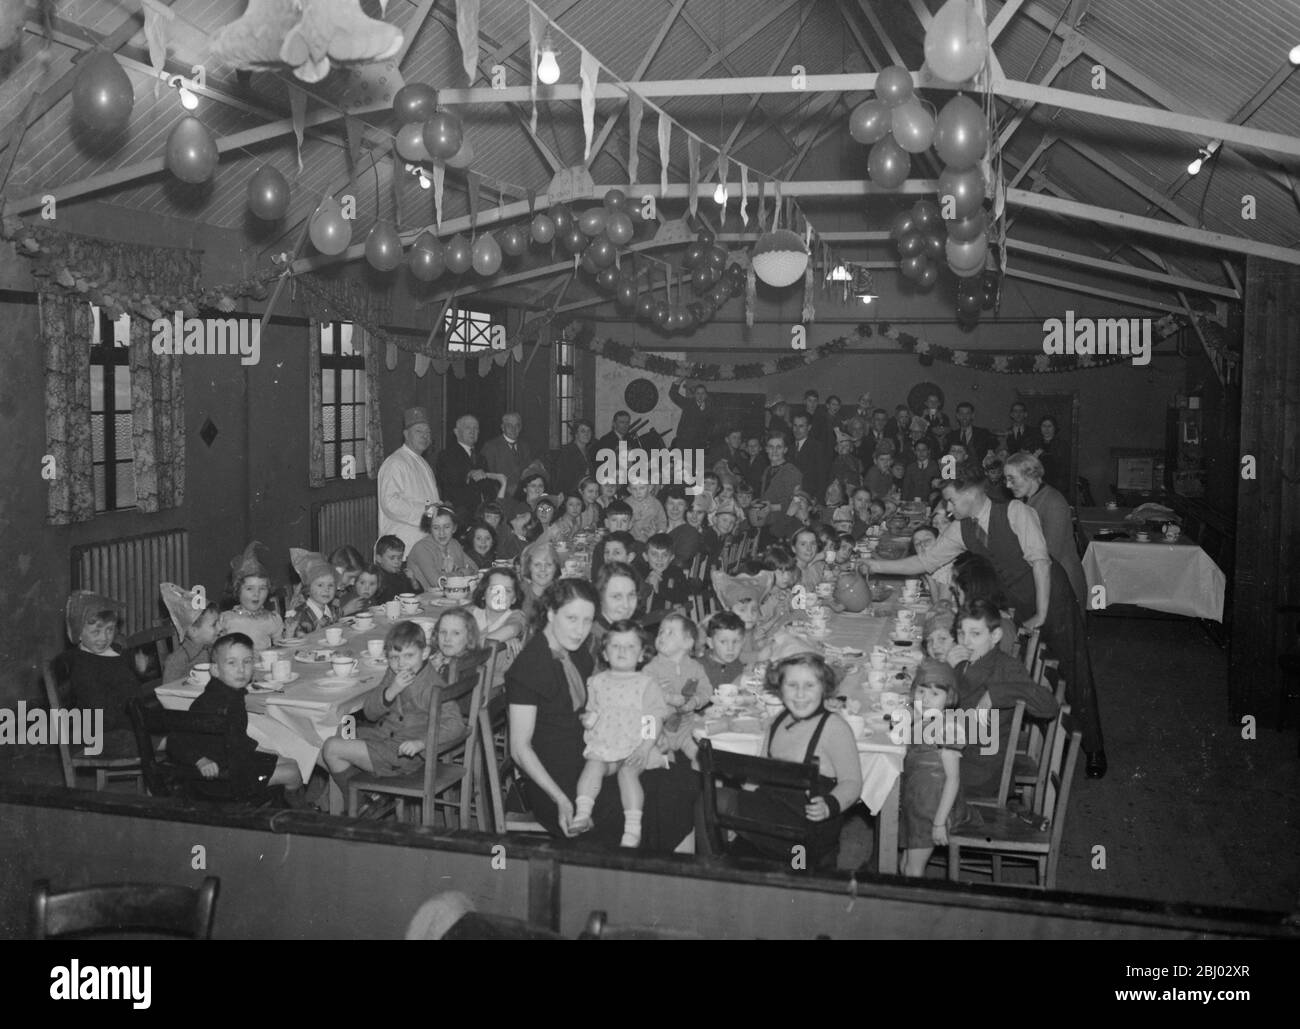 Sidcup Constitutional Club ' s Kinder ' s Partei . - 1938 Stockfoto